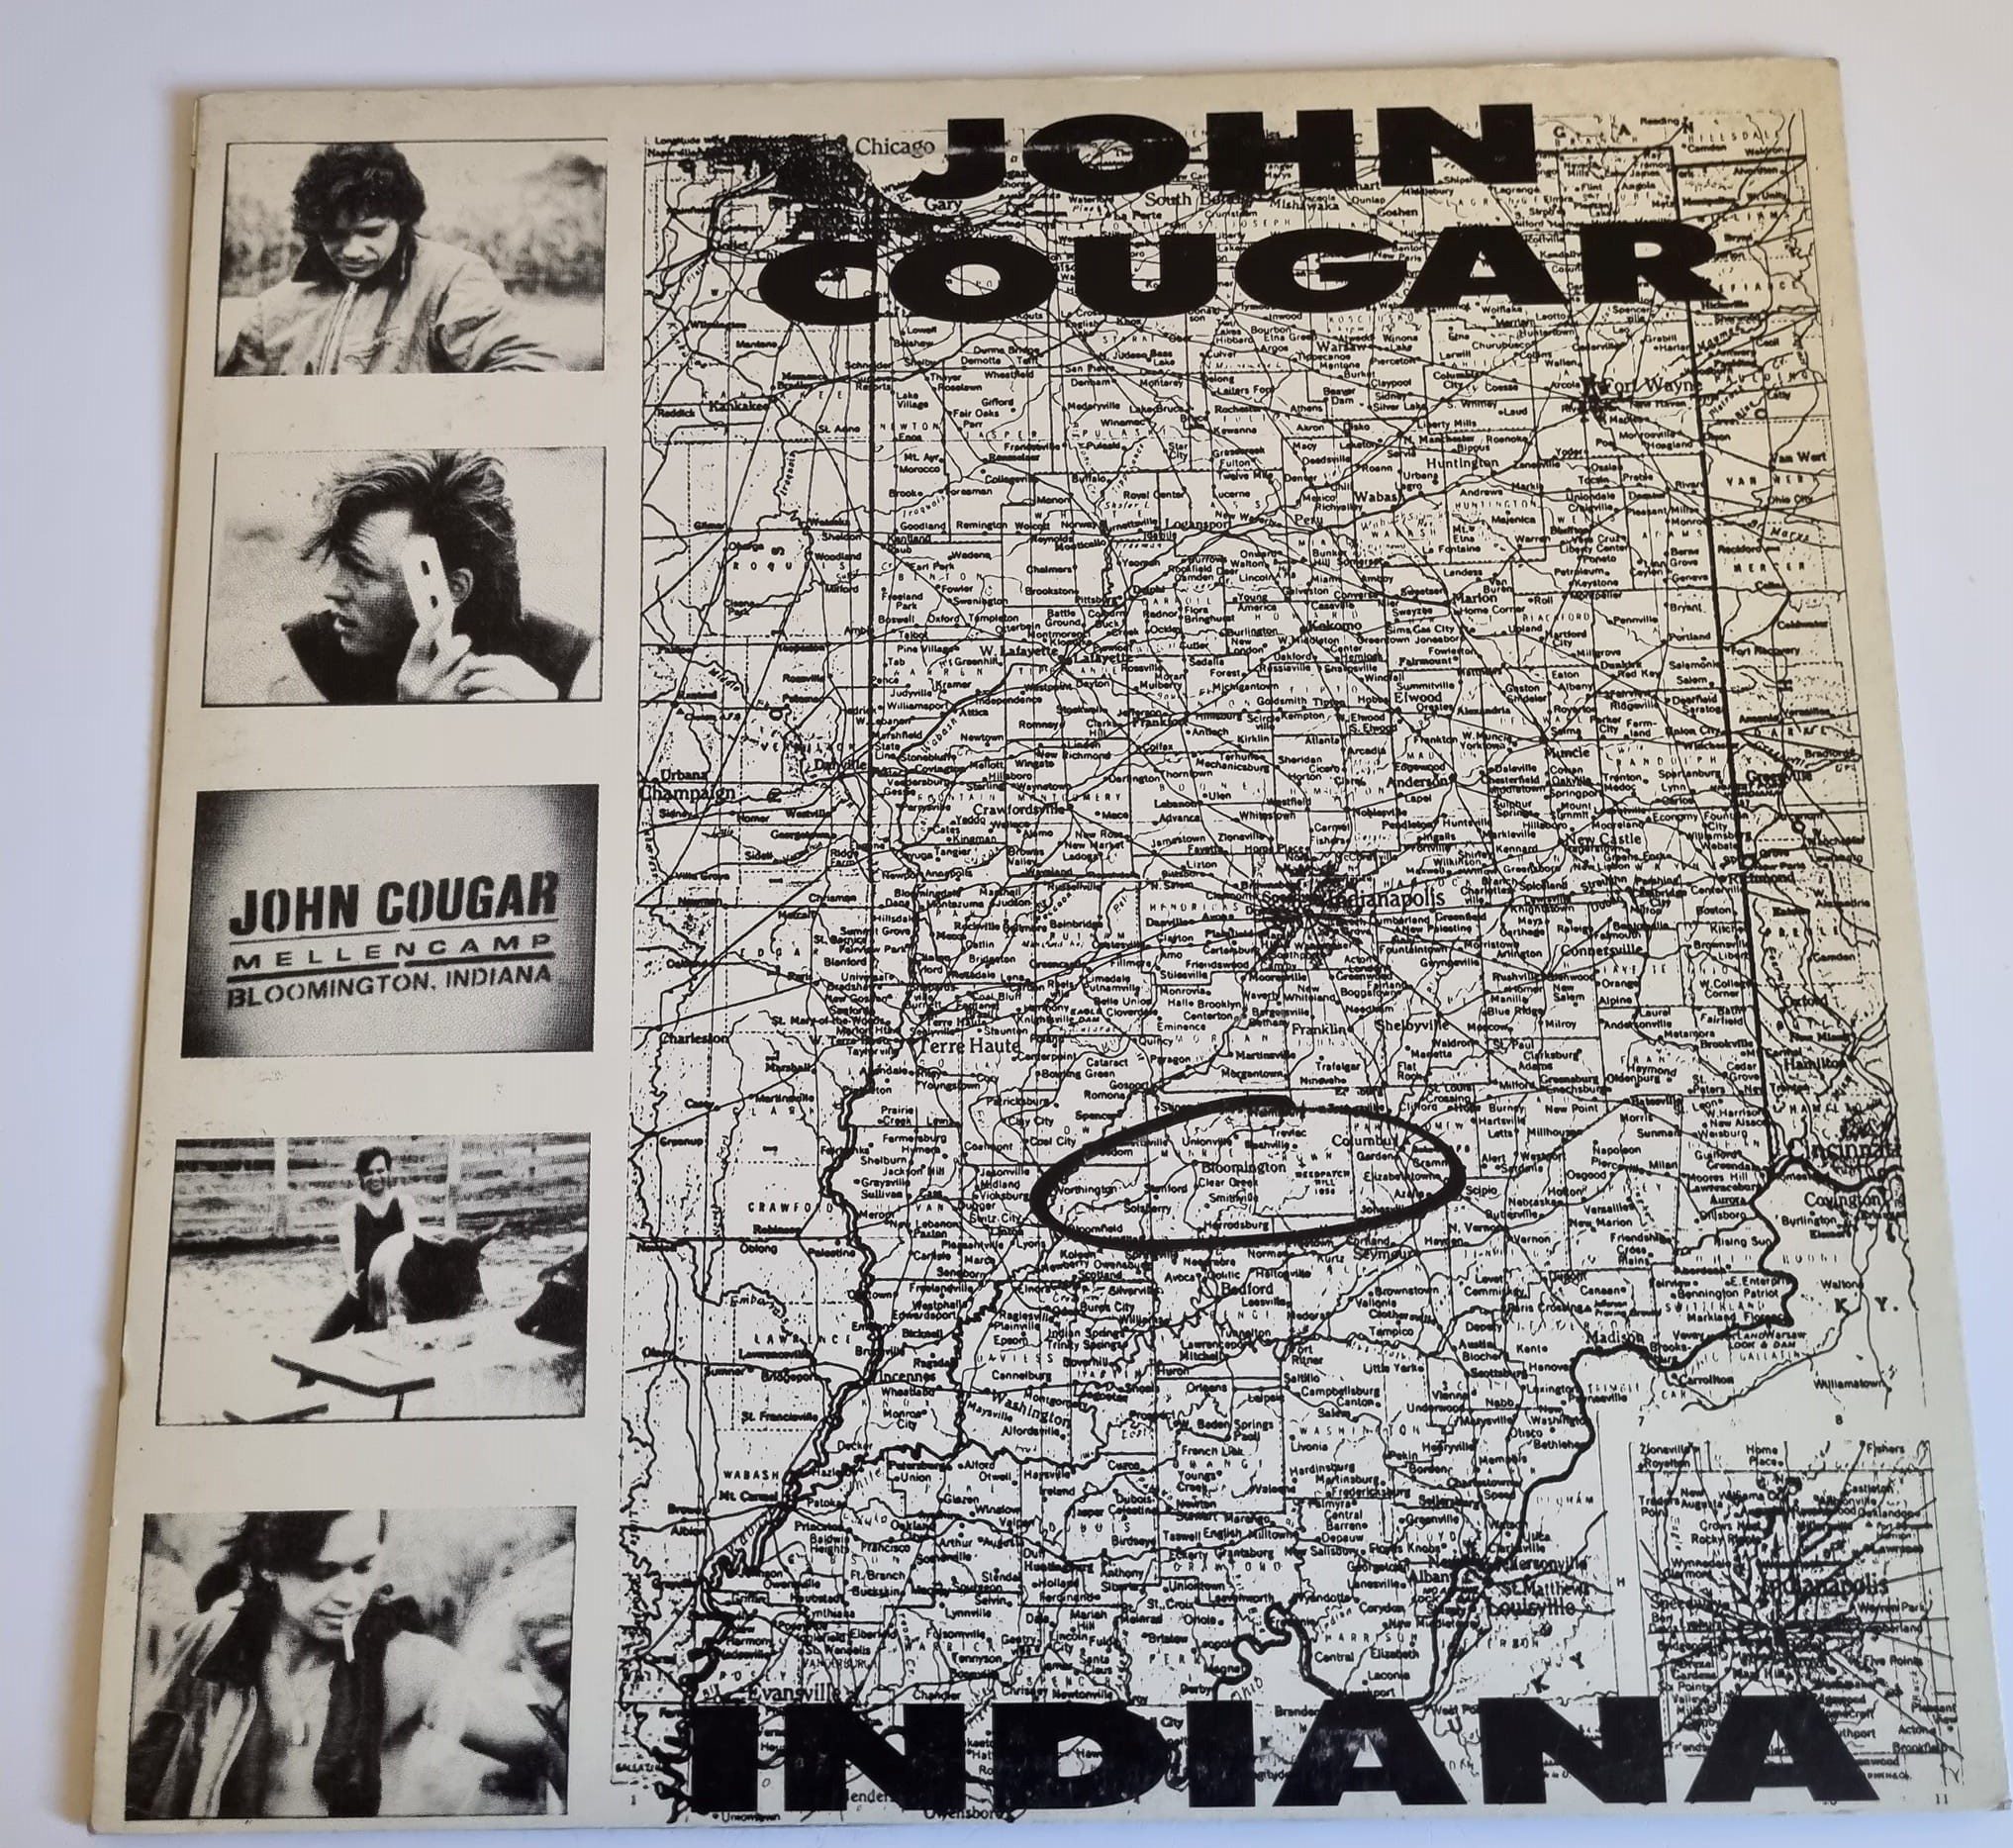 Buy this rare John Cougar record by clicking here